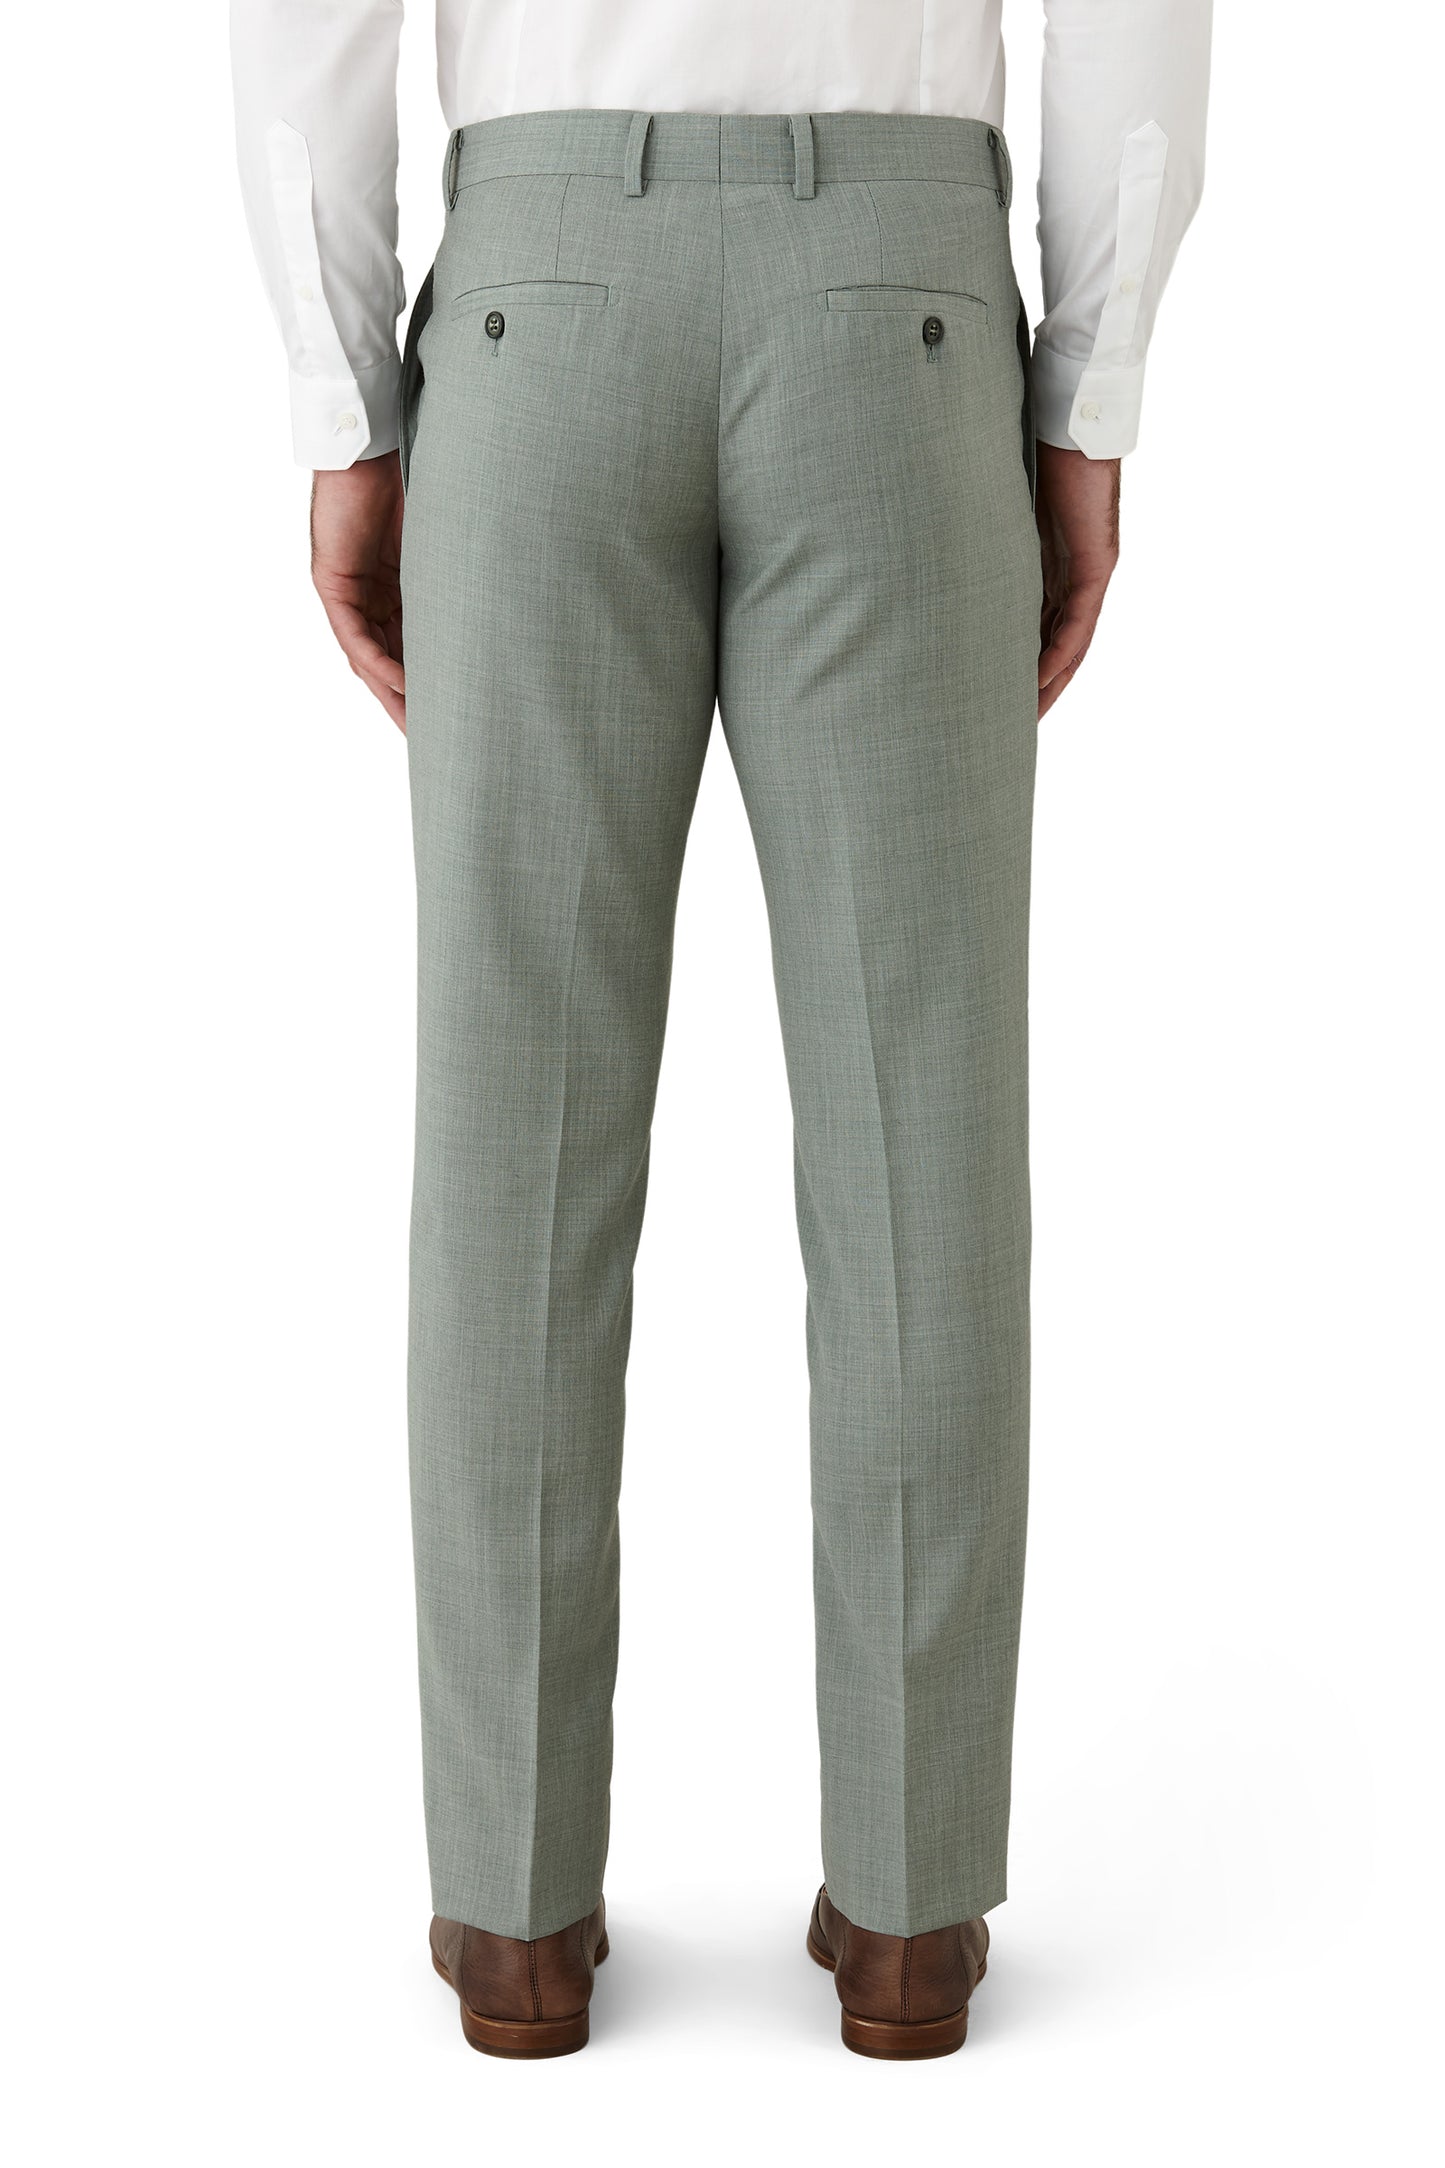 Gibson - Ionic/Caper Suit - Sage Green